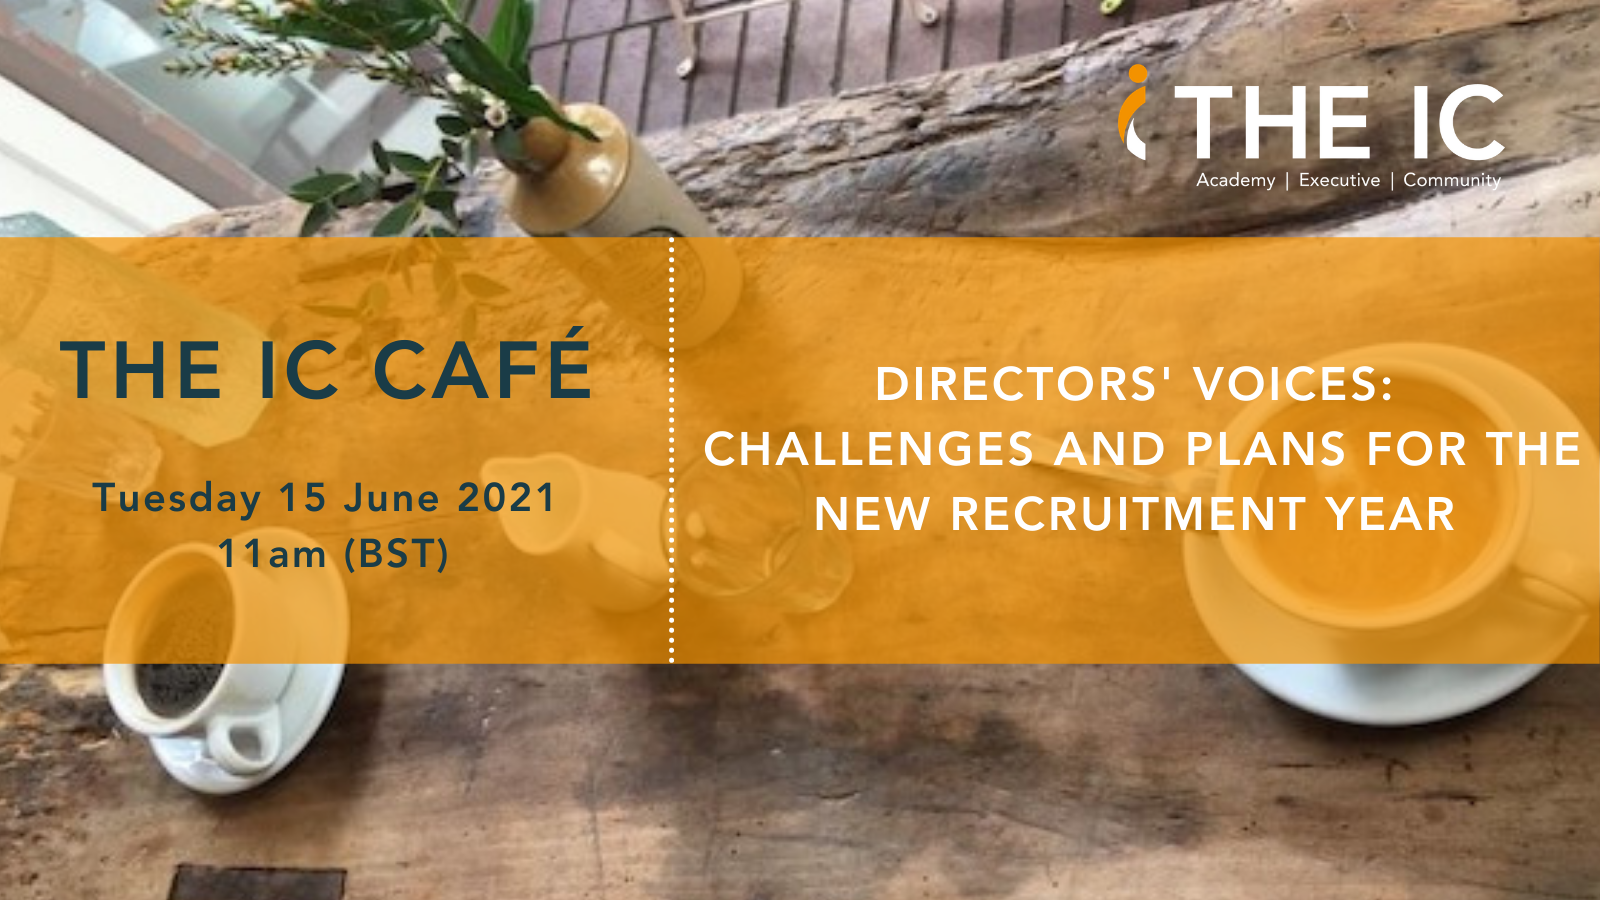 Directors’ Voices: challenges and plans for the new recruitment year.